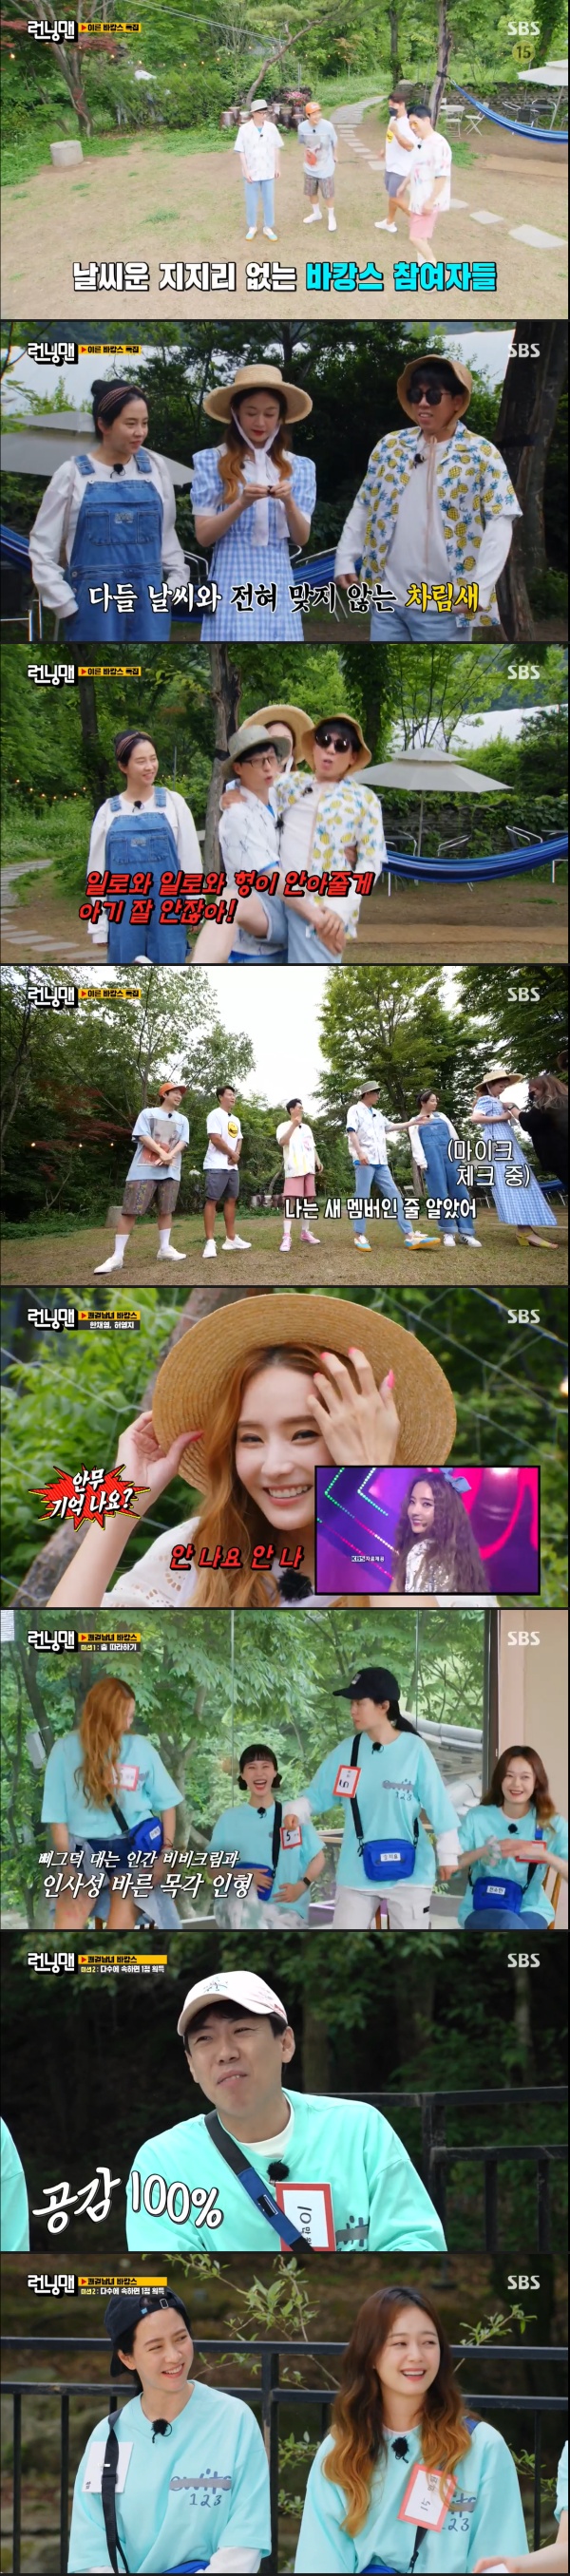 On the 27th SBS entertainment program Running Man, actors Han Chae-young and Heo Young appeared in the vacation special feature.On this day, Jeon So-min shot Ji Suk-jin, saying, Sukjin brother will be a loud guide no matter how much you make fun of today.Yang Se-chan said, I received a singer and a singer. Haha teased Ji Suk-jin, saying, Suddenly, I was singing a name tag on YouTube.Ji Suk-jin teased him about his performance in What to Do When You Play, and Ji Suk-jin was fed up with saying, I knew I was going to talk about it.The crew introduced the guest, saying, Today I left a little early vacation. Then, Han Chae-young and Heo Young appeared as guests.Did I hear it before Mr. Young Chaes greetings? said Yoo Jae-Suk, laughing, Is not Mr. Seok Jin-yi . not a human being?So, Jeon So-min told Ji Suk-jin, Oh, what is your brother Barbie doll?Ji Suk-jin was embarrassed and said, Wow, its a pleasure to see you for the first time. Its our kind greeting.It was funny to see this brother wanting to pretend he knew too urgently, said Yoo Jae-Suk.Han Chae-young surprised members by revealing he was the first appearance on Running Man.Han Chae-young laughed at the members by saying, I am a little bit of a summer person, so did you call me?Oh, Im talking about human beings, Haha said.On this day, Yoo Jae-Suk introduced Heo Young as Human Gnostic Mushroom Heo Young appeared.Heo Young surprised the members by saying, In fact, Im the first to appear in Running Man (like Han Chae-young).Kim Jong-kook wondered, So where did we see it? Heo Young said, Ive been a terrestrial wave for a long time, and Im only playing on YouTube.Heo Young then mentioned Yang Se-chan: I often see him with his brother, Kobik MC, and its awkward to see him like this.Heo Young said, It is the leader of the children there ... it is like the youngest here.Youre just stirring around in Yang Sebari, said Yoo Jae-Suk, who replied, Im going to have to make fun of you today.Yang Se-chan said, I am the highest there.The full-scale game began and Yang Se-chan became a team with Ji Suk-jin and started the diss.Yang Se-chan told Ji Suk-jin, Today my brother is not the old tension, Song Ji-hyo said, Is that because of my brother really what do you do when you play?Im sorry, weve been doing it for over a decade, said Song Ji-hyo, who then said, What are we to my brother? which made Ji Suk-jin restless.I was really sorry that my brother Seok-jin commented on MGS Wannabe members like that, did you see him commenting on us? said Jeon So-min.Ji Suk-jin said, Its not that, they commented a lot, so I just have to put it on.My brother is probably ashamed of us, Yang Se-chan said.On the other hand, SBS Running Man is broadcast every Sunday at 5 pm.